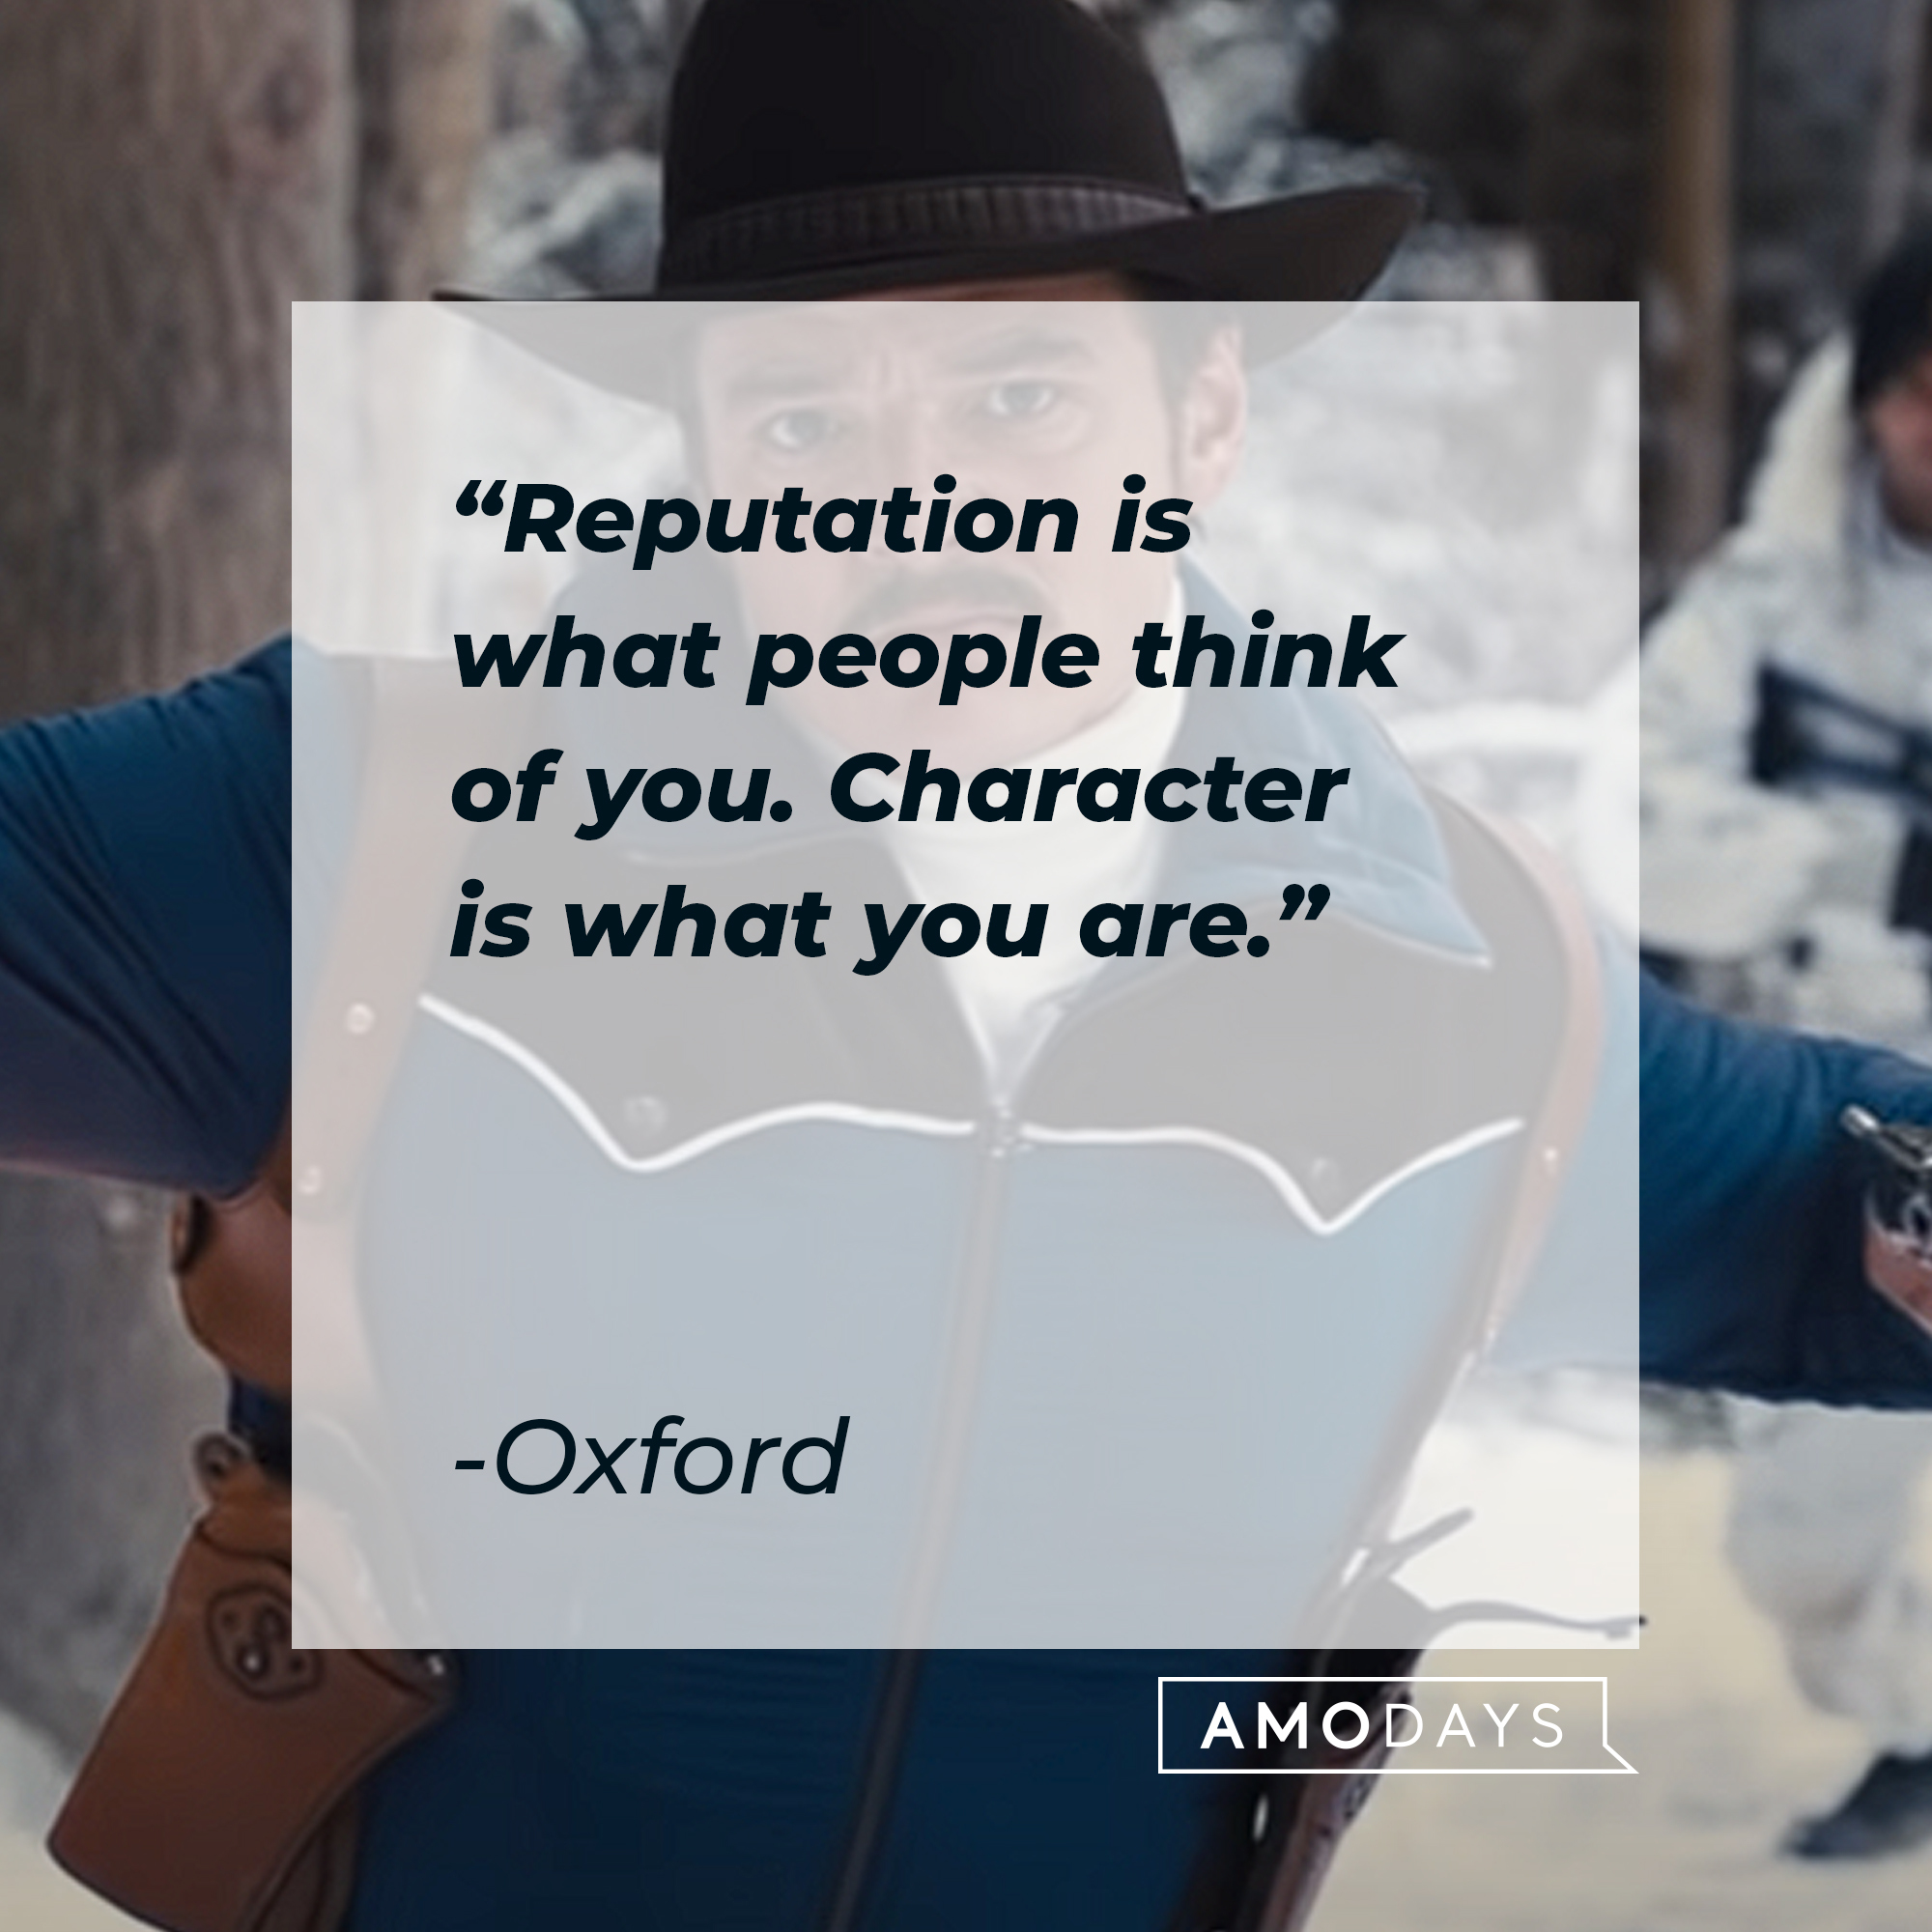 Oxford's quote: "Reputation is what people think of you. Character is what you are" | Image: YouTube / 20thCenturyStudios